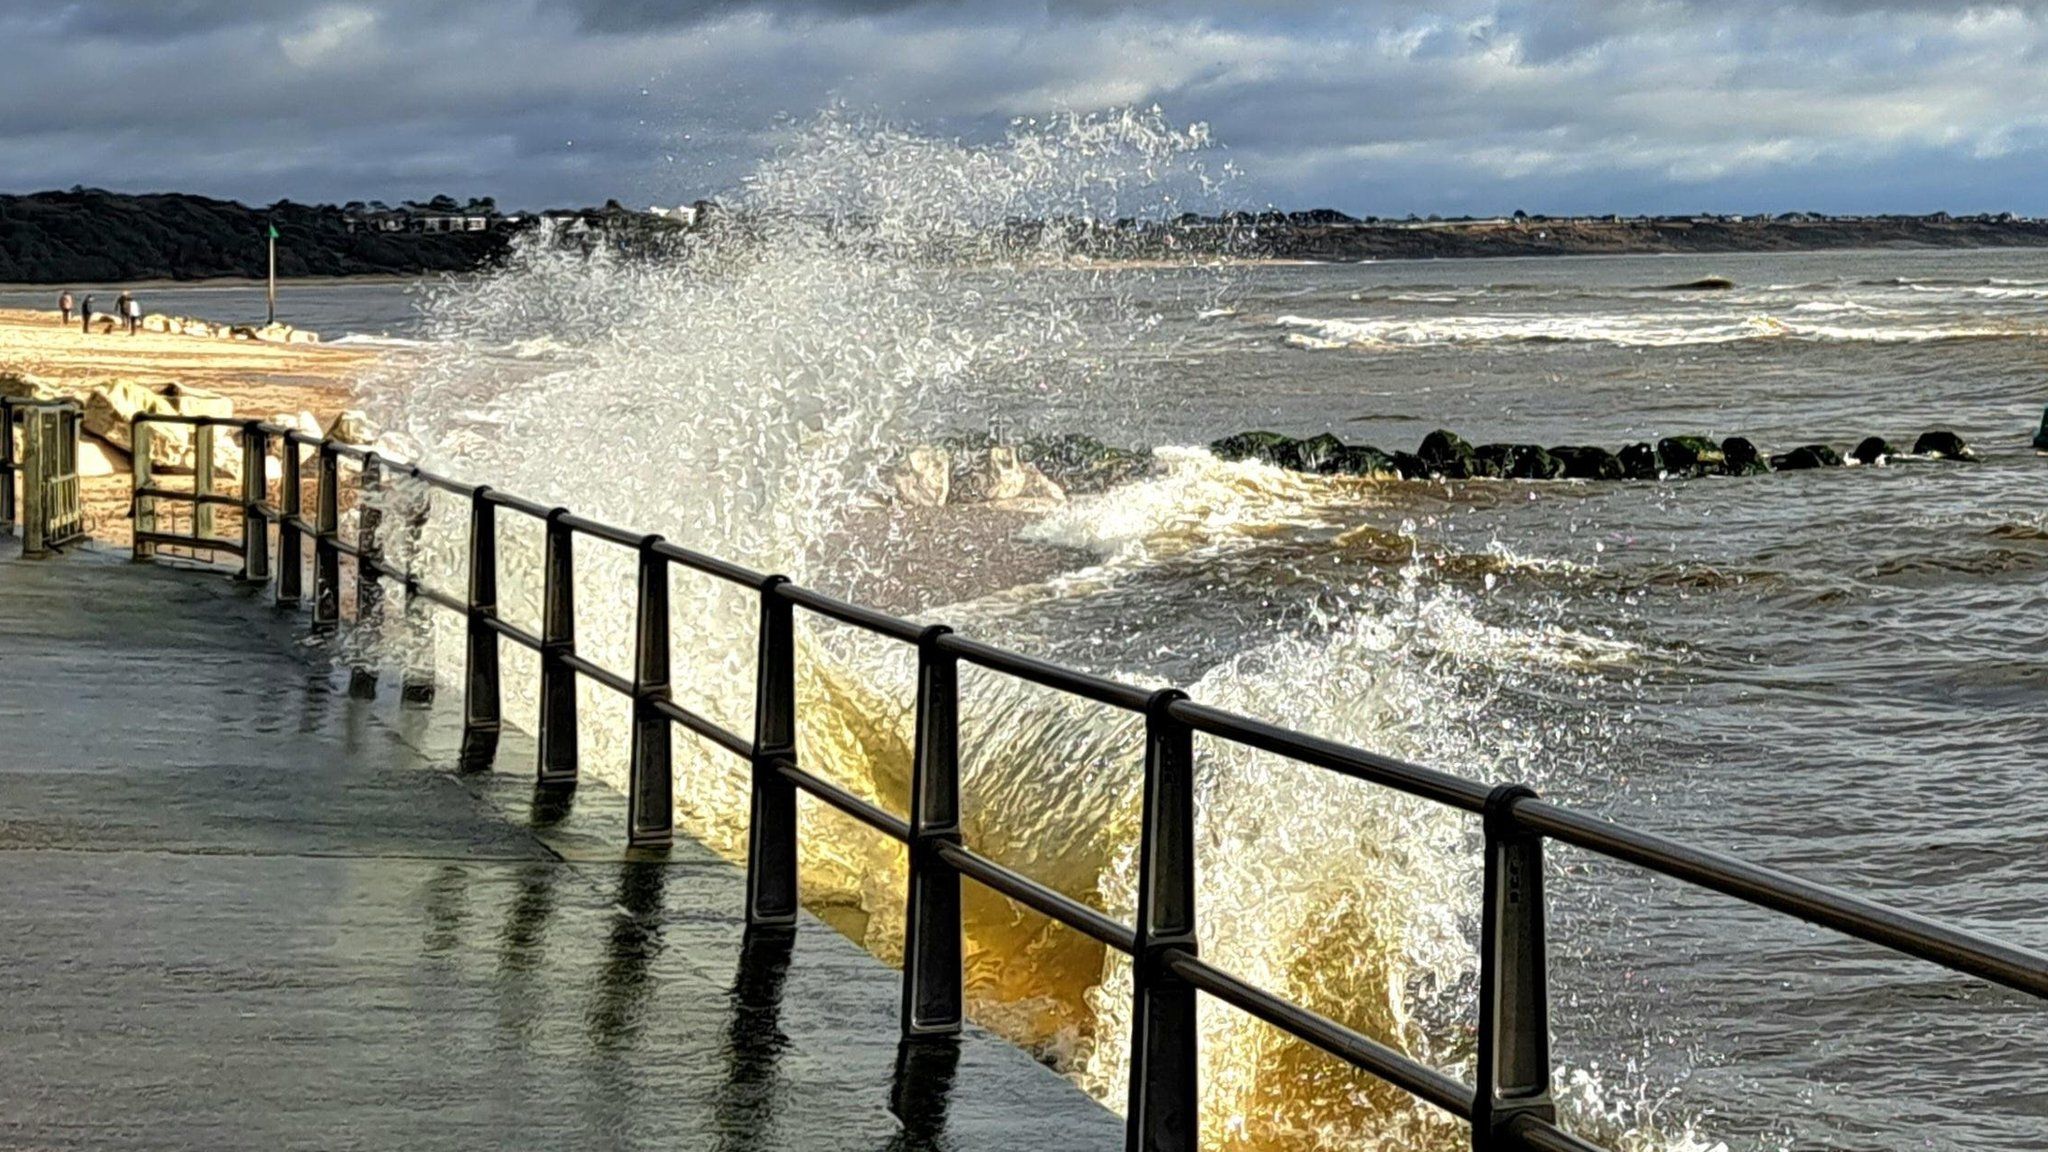 This dramatic shot of the waves crashing against the promenade in Mudeford was caught on camera by MarkieB